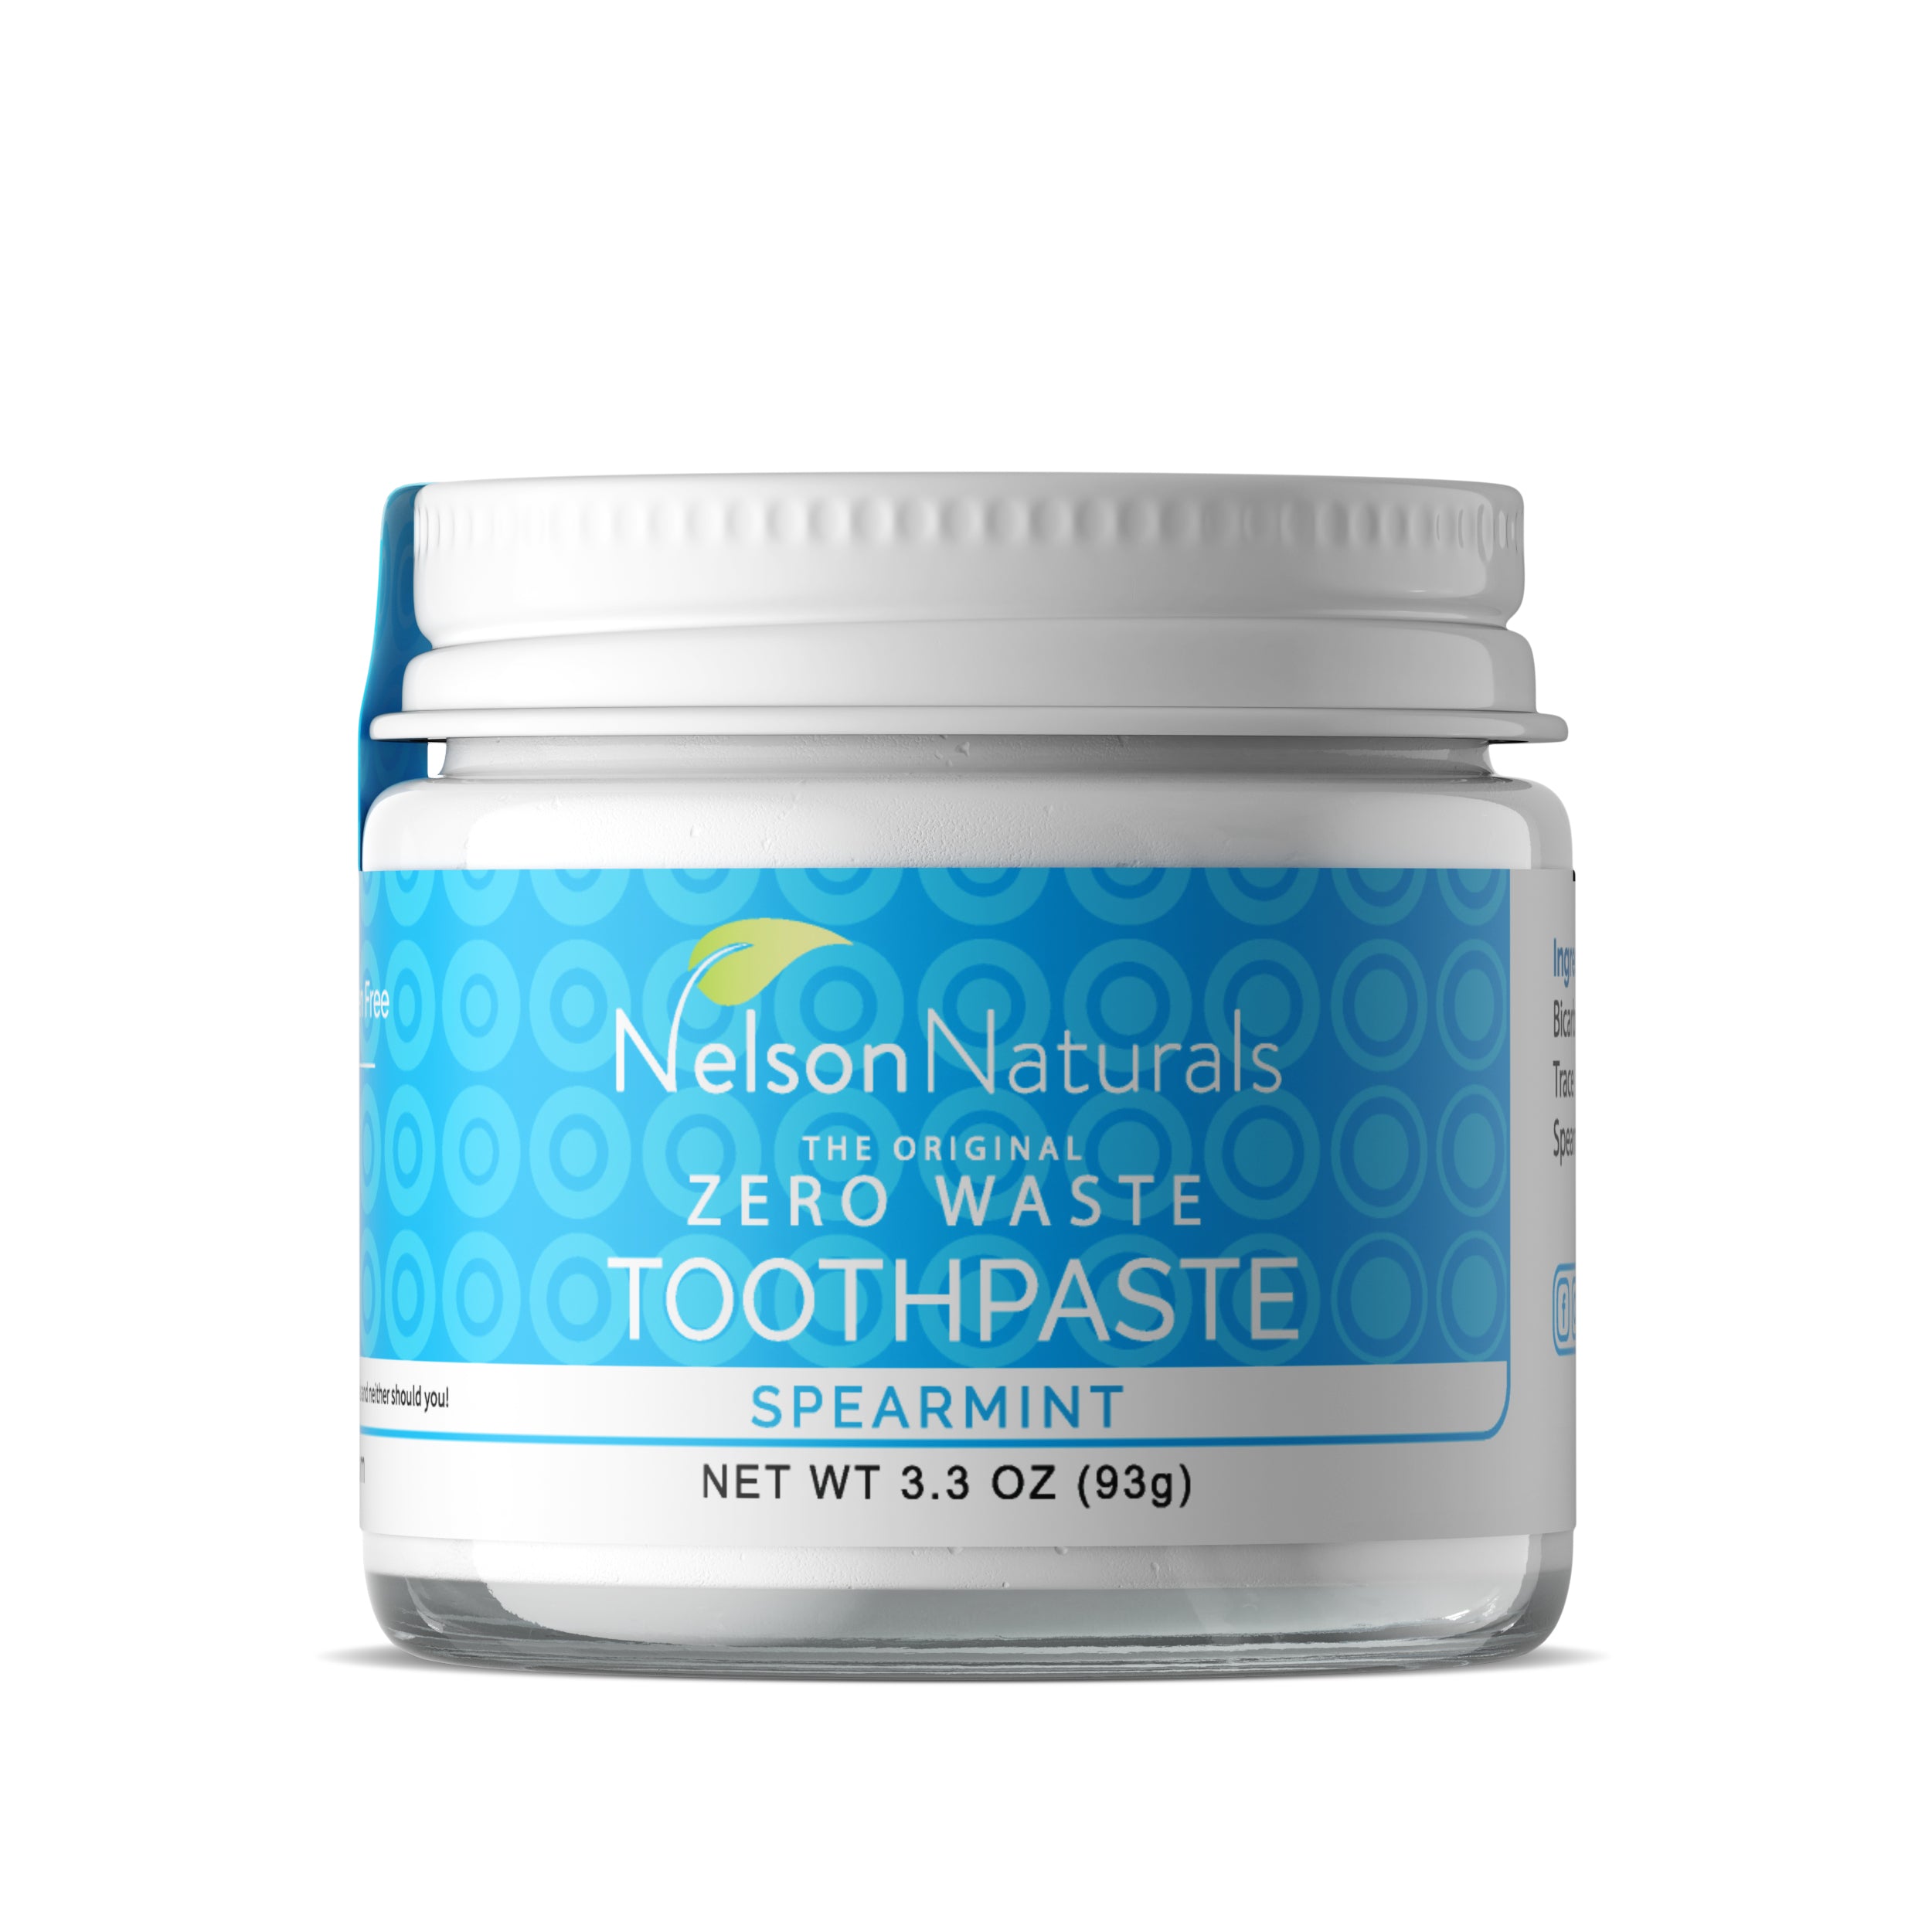 Spearmint Toothpaste 93g - WHOLESALE Toothpaste - nelsonnaturals remineralizing toothpaste